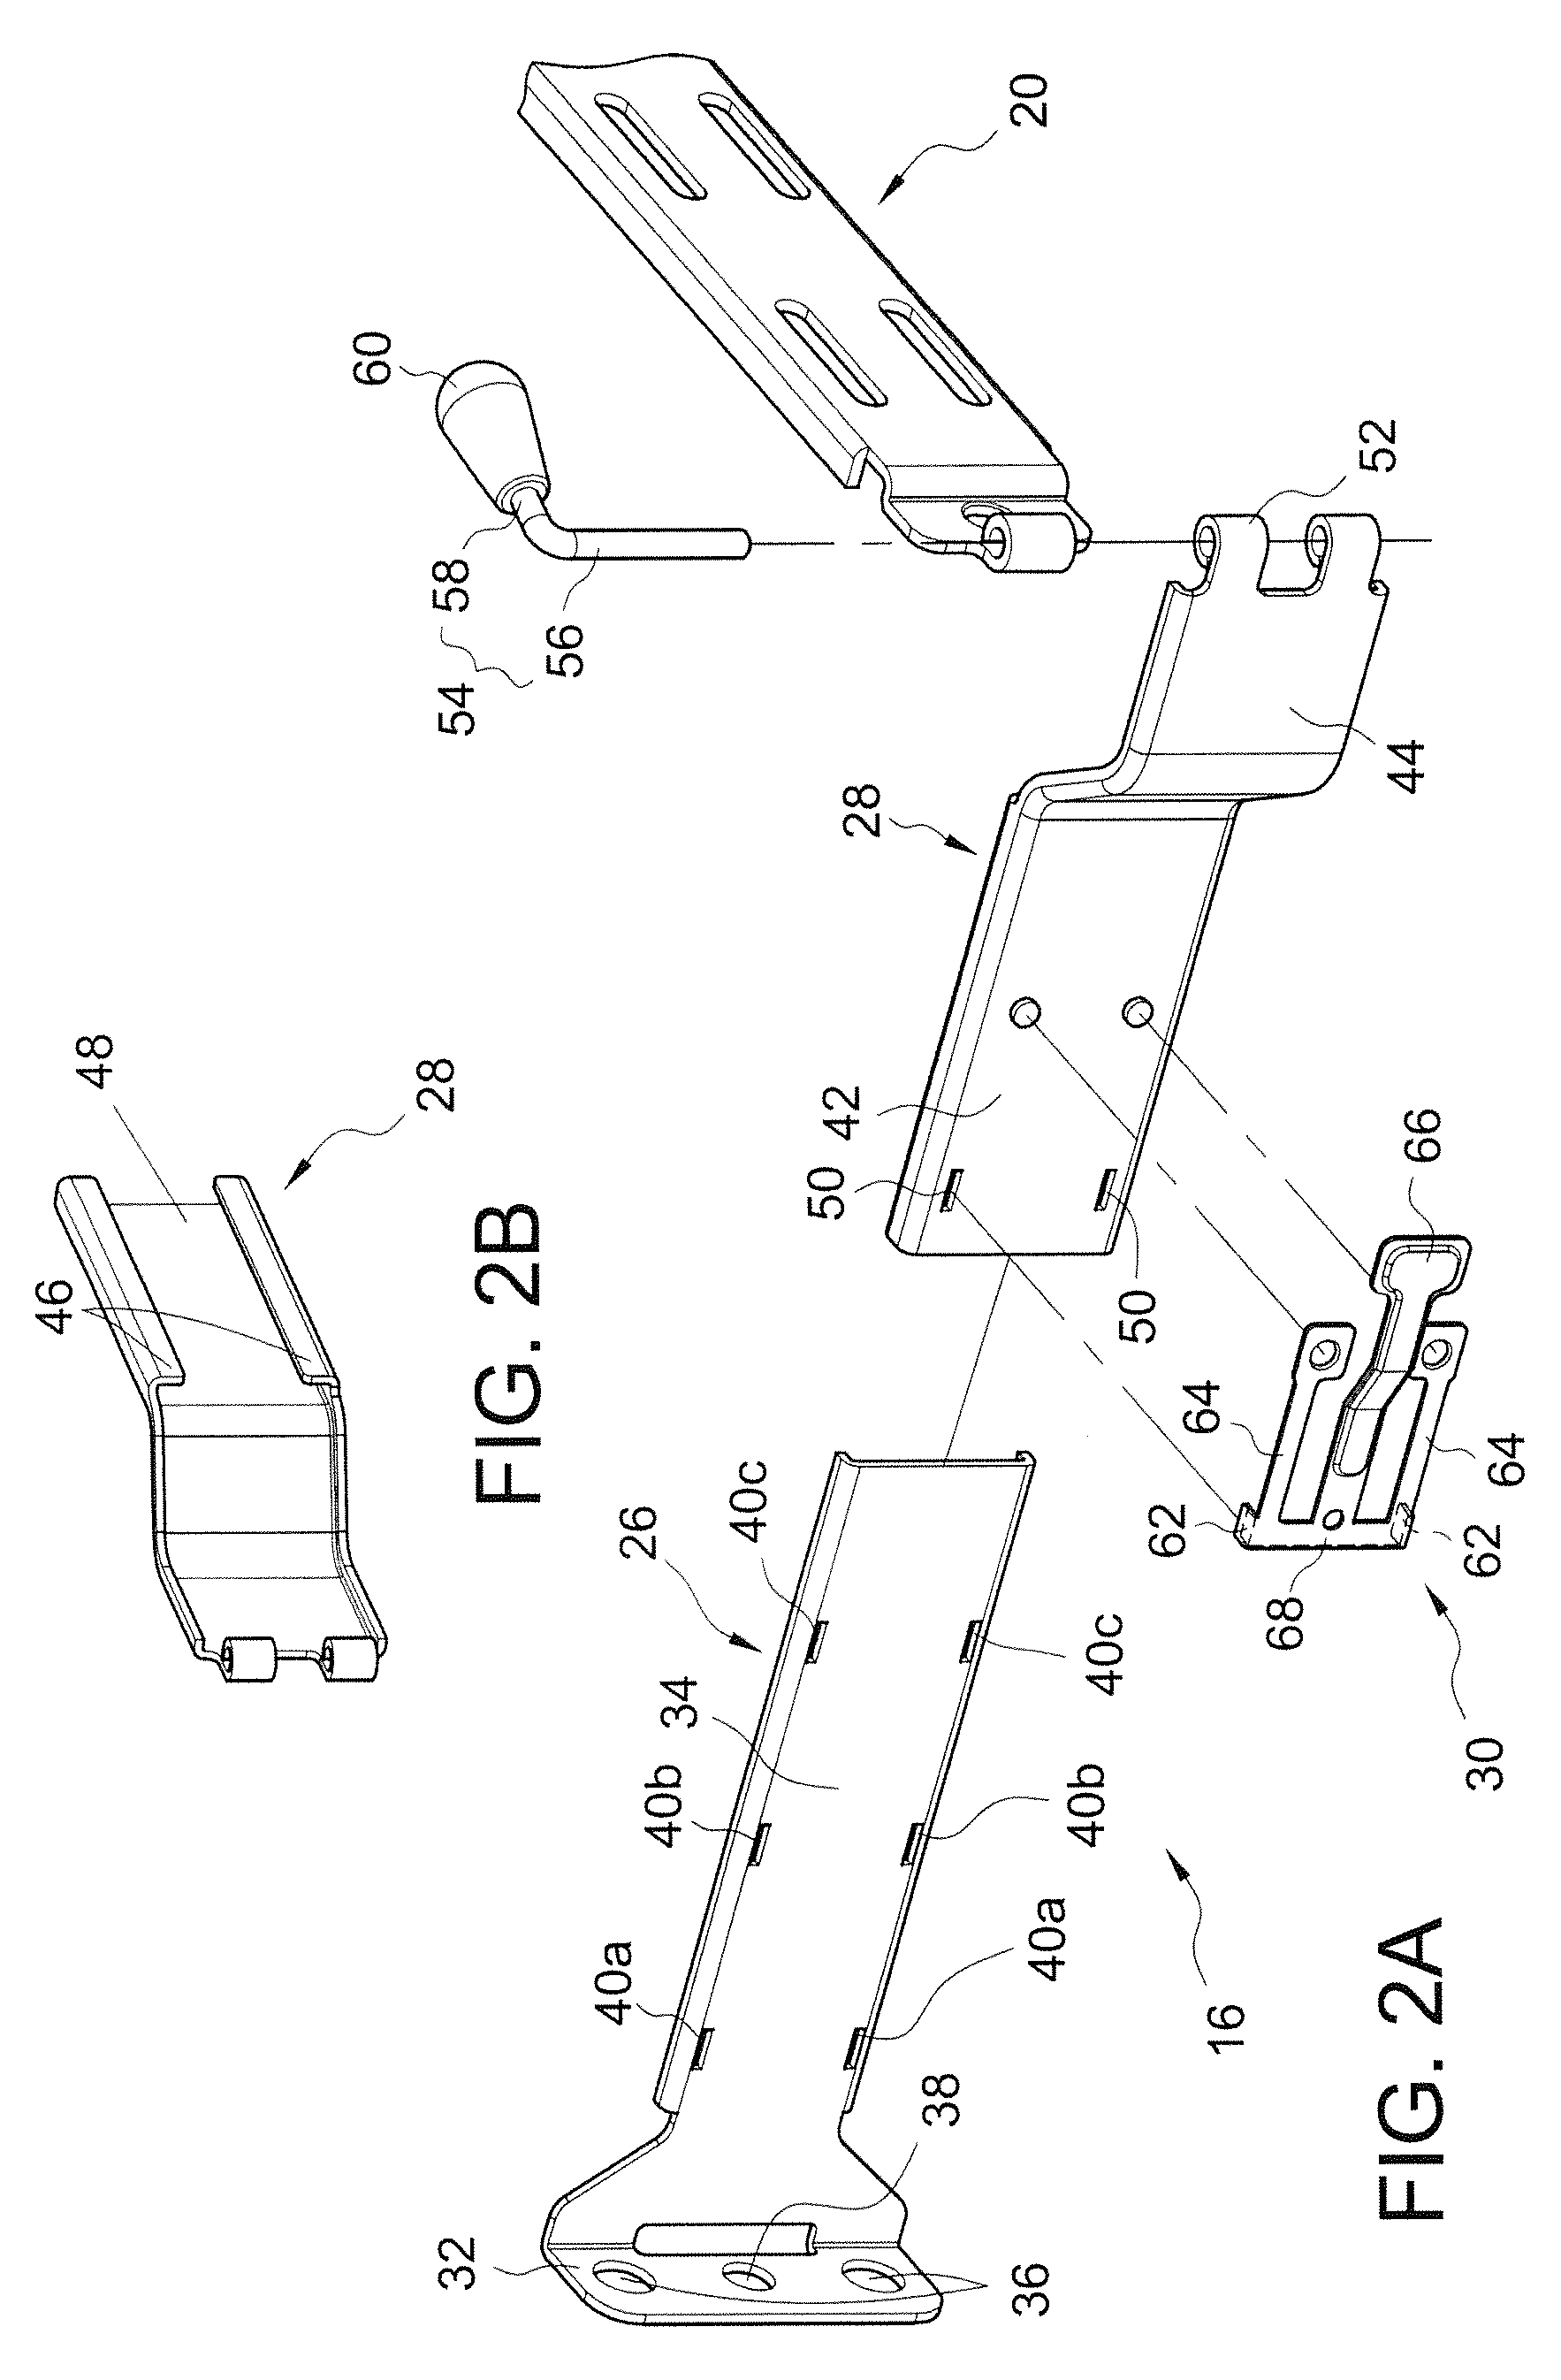 Adjustment device for cable management arm